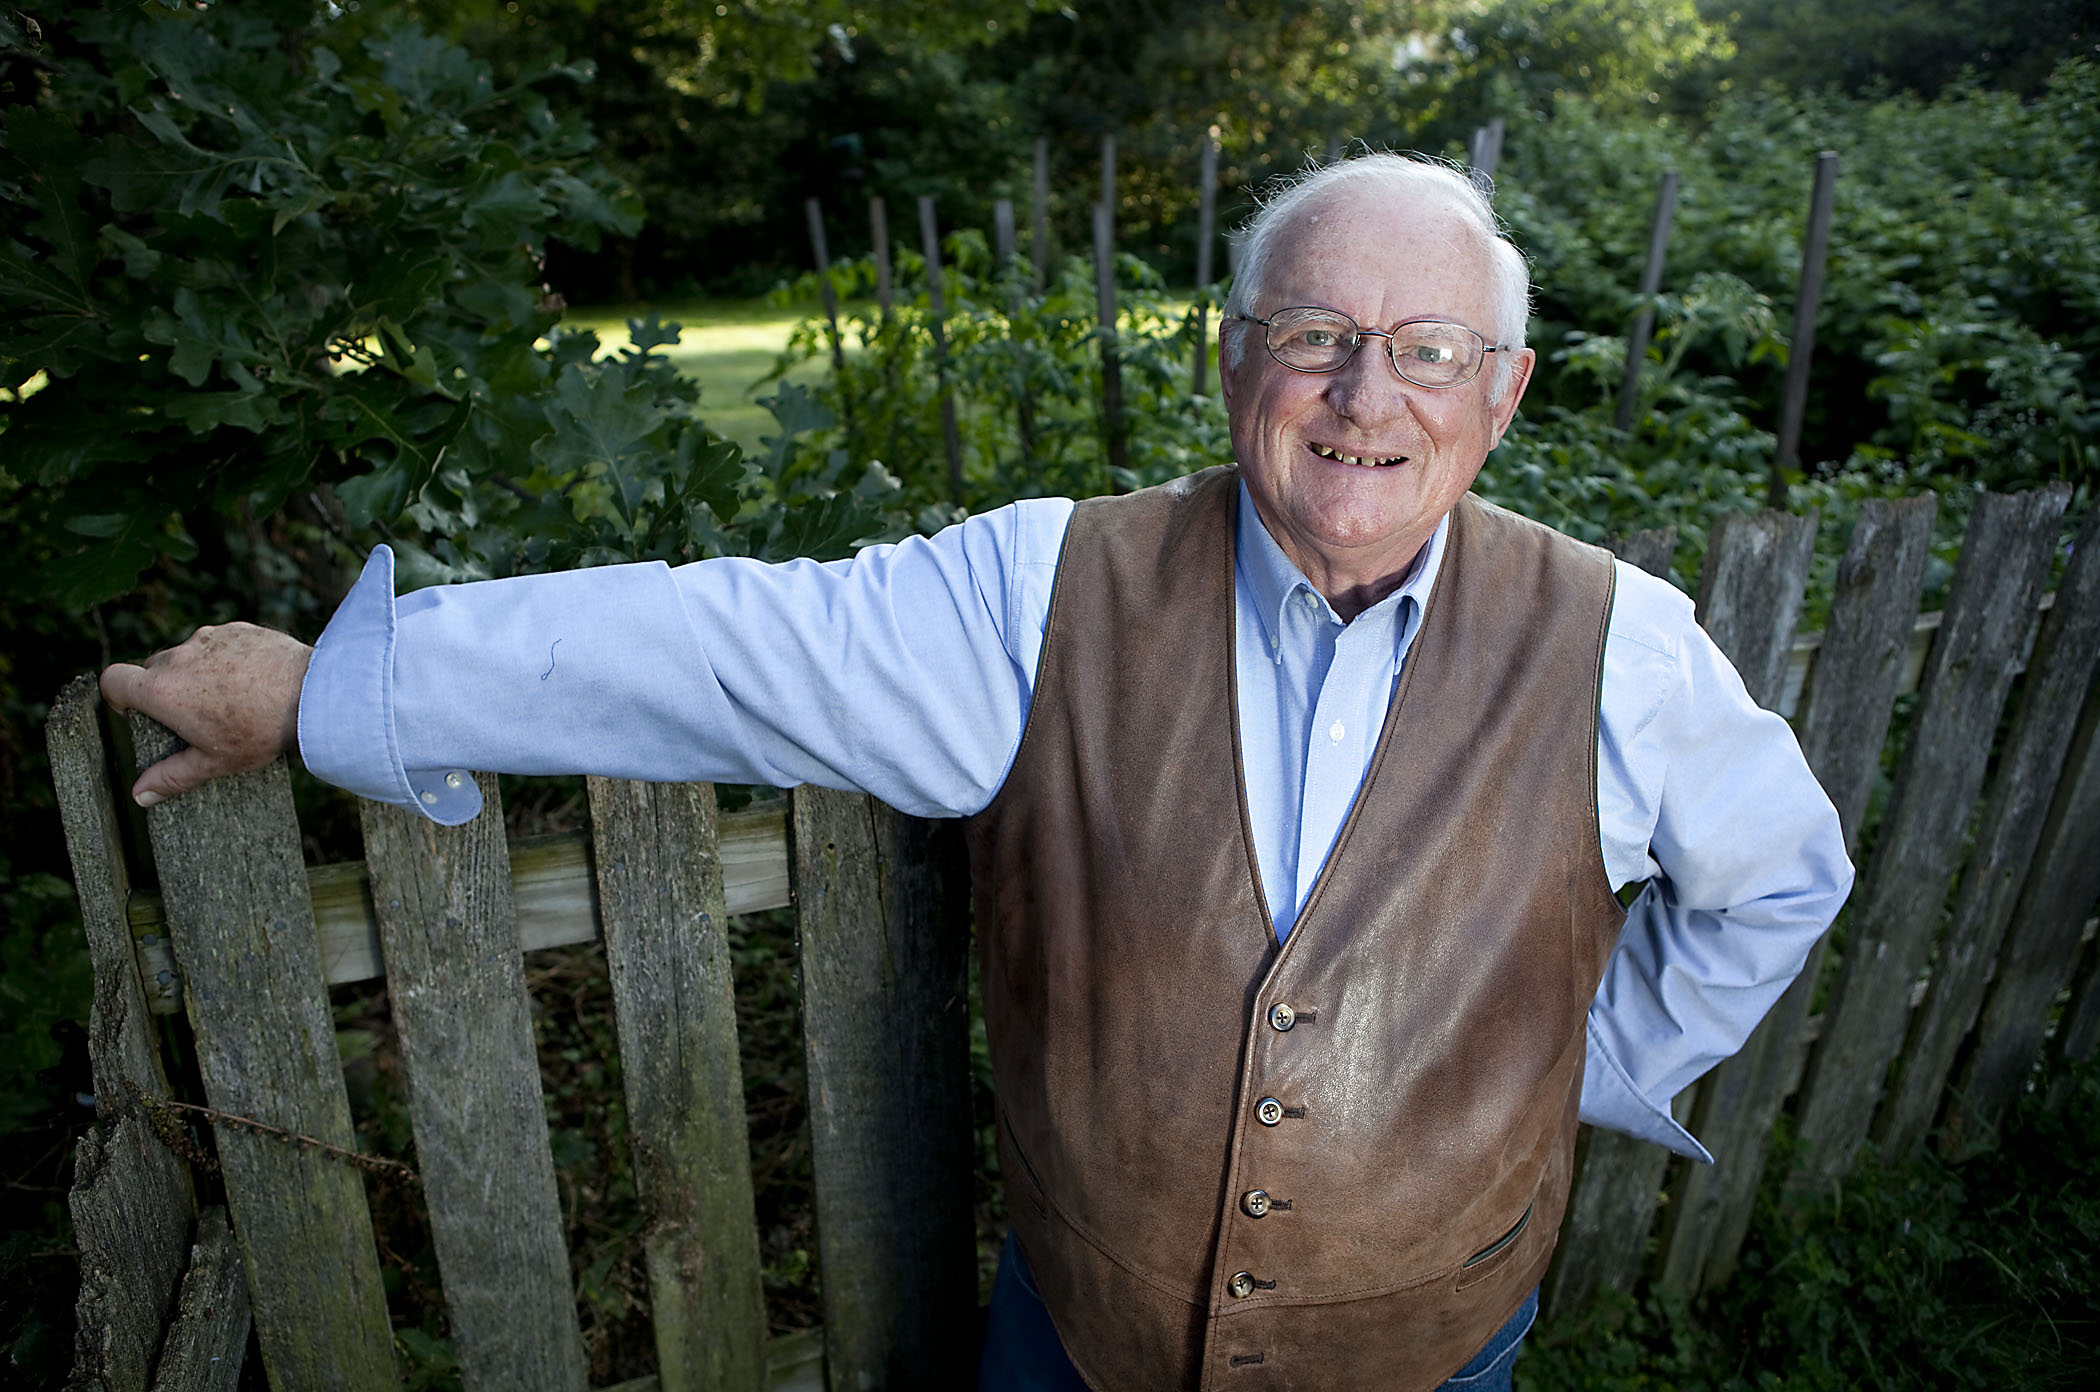 Author Jerry Apps stands in front of a garden